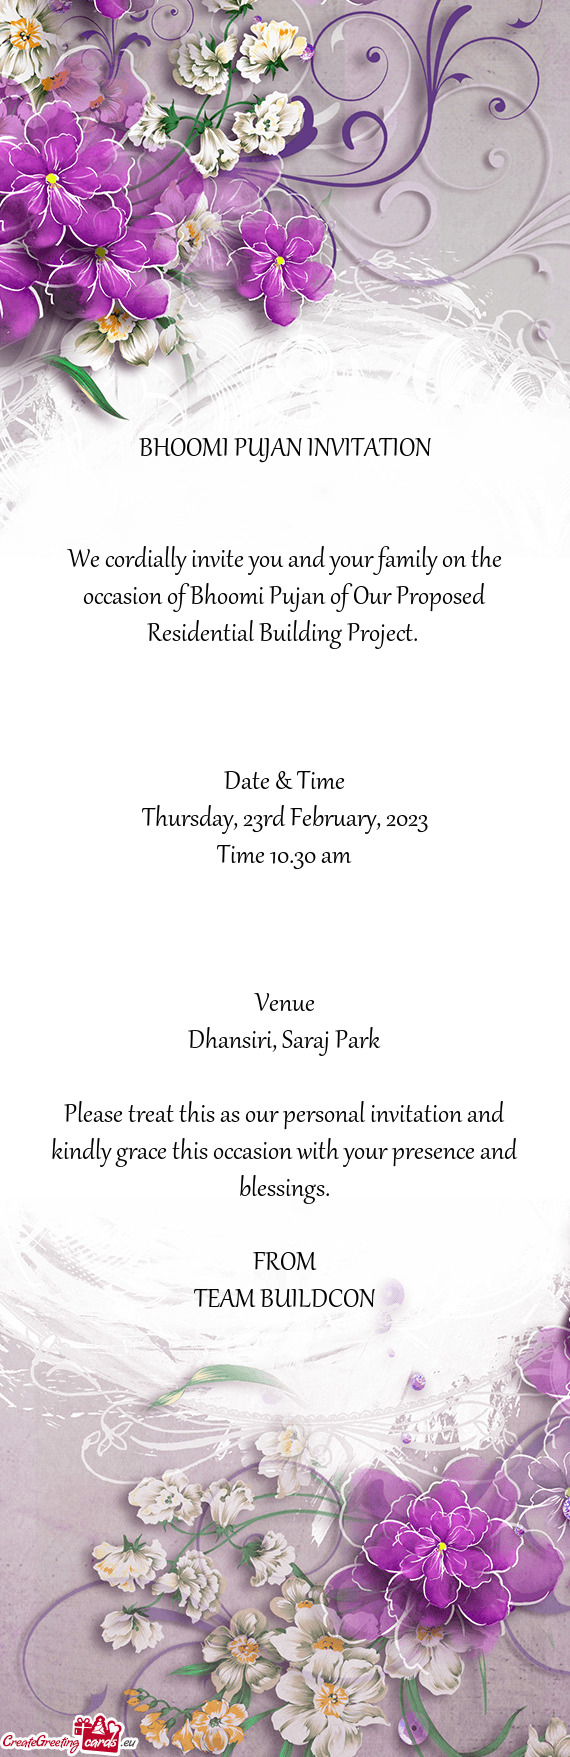 We cordially invite you and your family on the occasion of Bhoomi Pujan of Our Proposed Residential